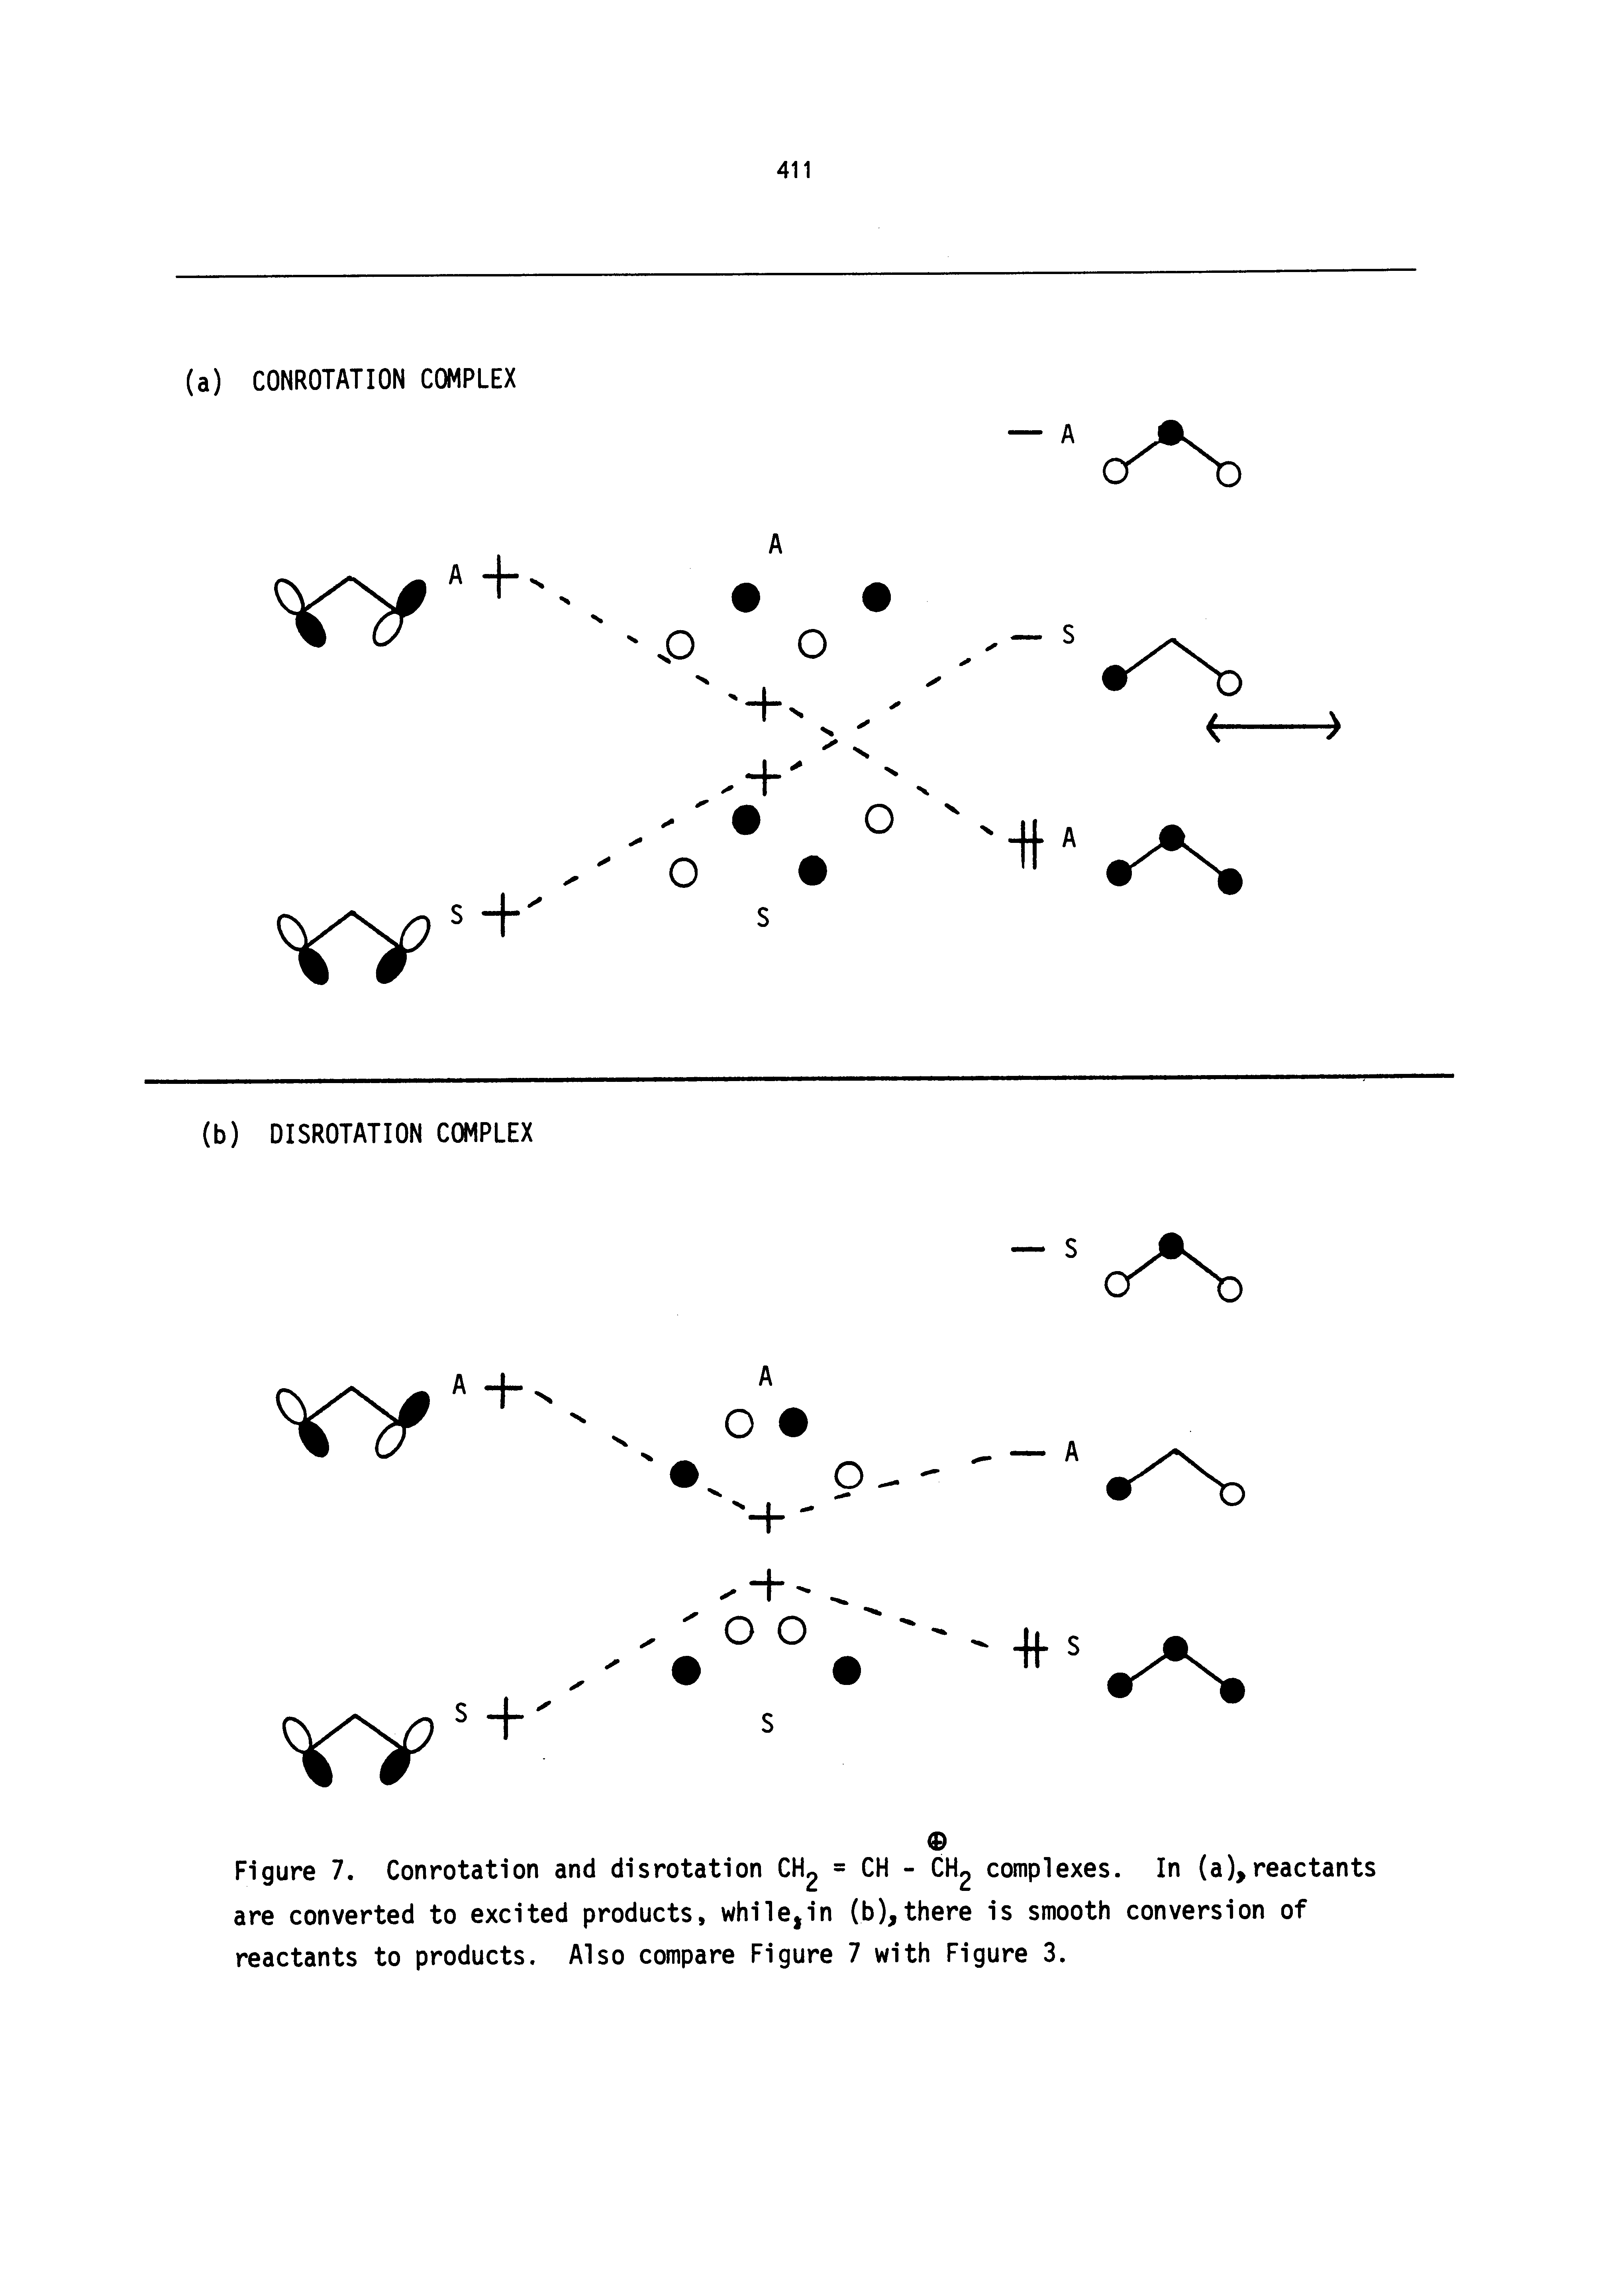 Figure 7. Conrotation and disrotation CH2 = CH - CH complexes. In (a),reactants are converted to excited products, while,in (b),there is smooth conversion of reactants to products. Also compare Figure 7 with Figure 3.